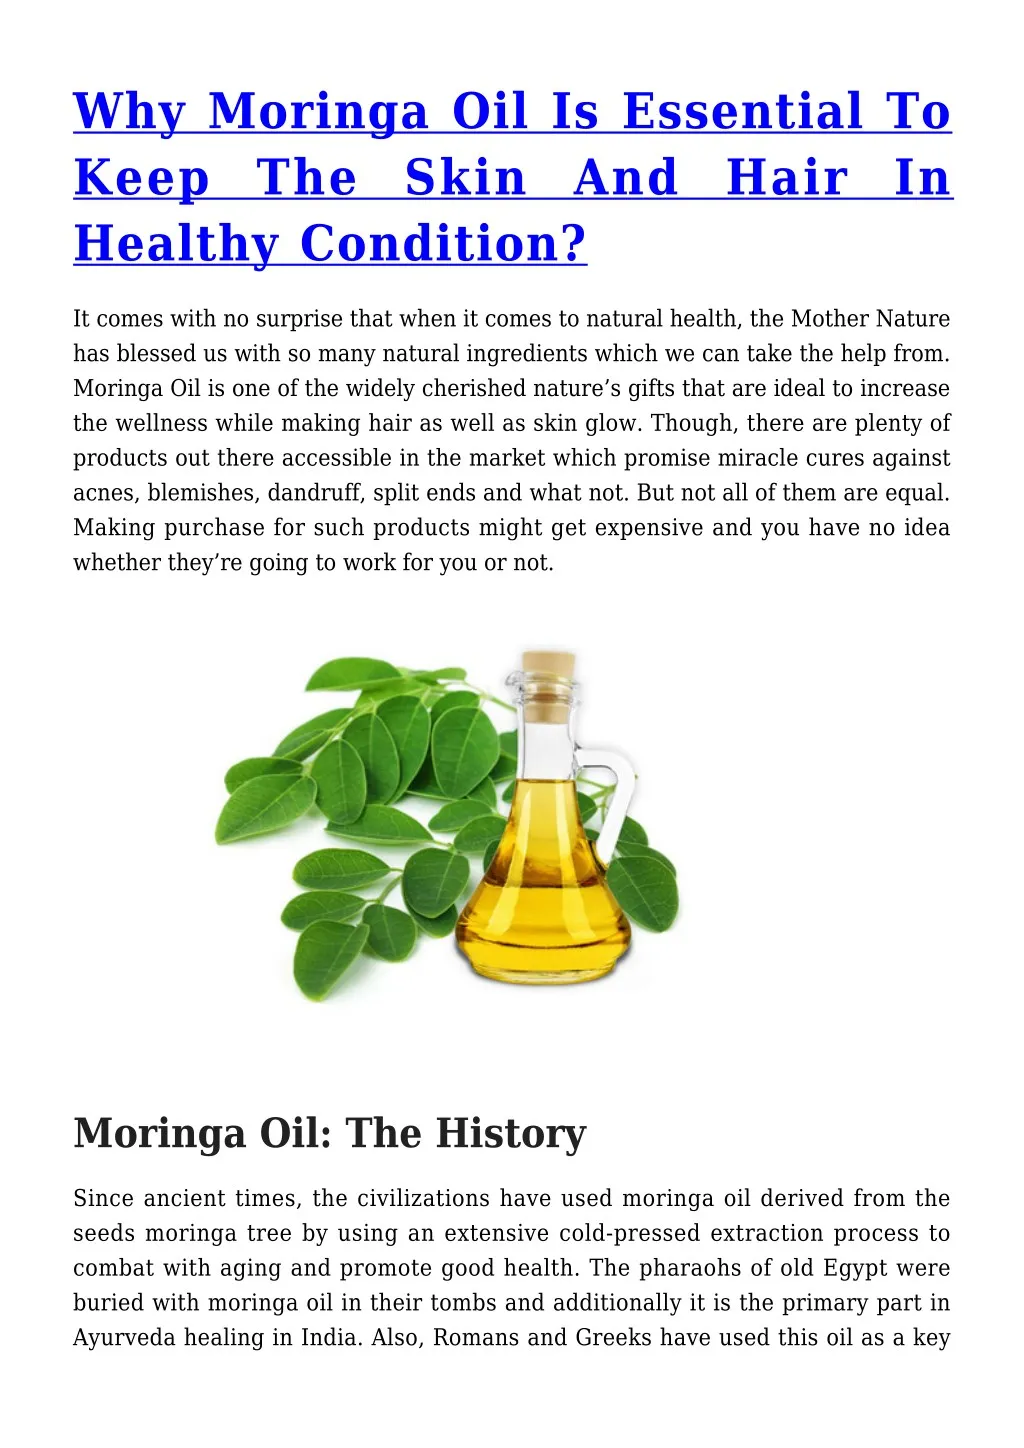 why moringa oil is essential to keep the skin